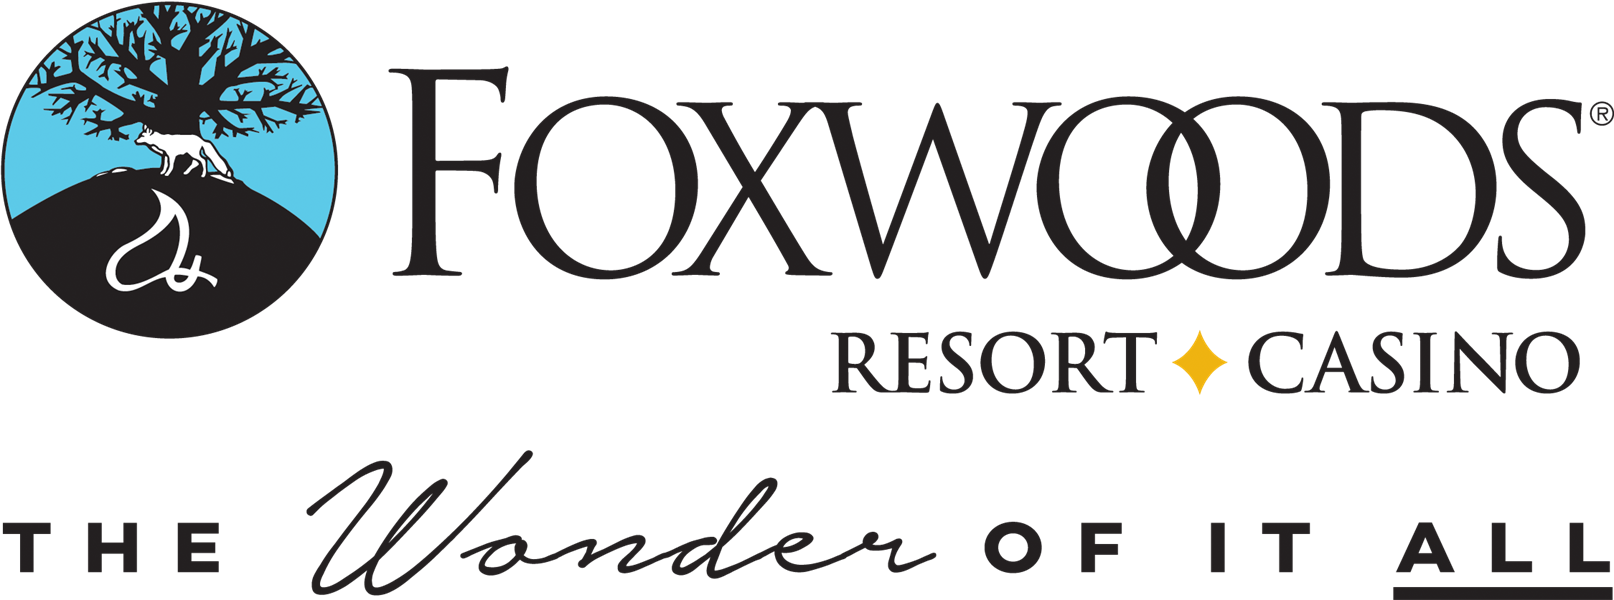 hotels without bedbugs near foxwood casino connecticut